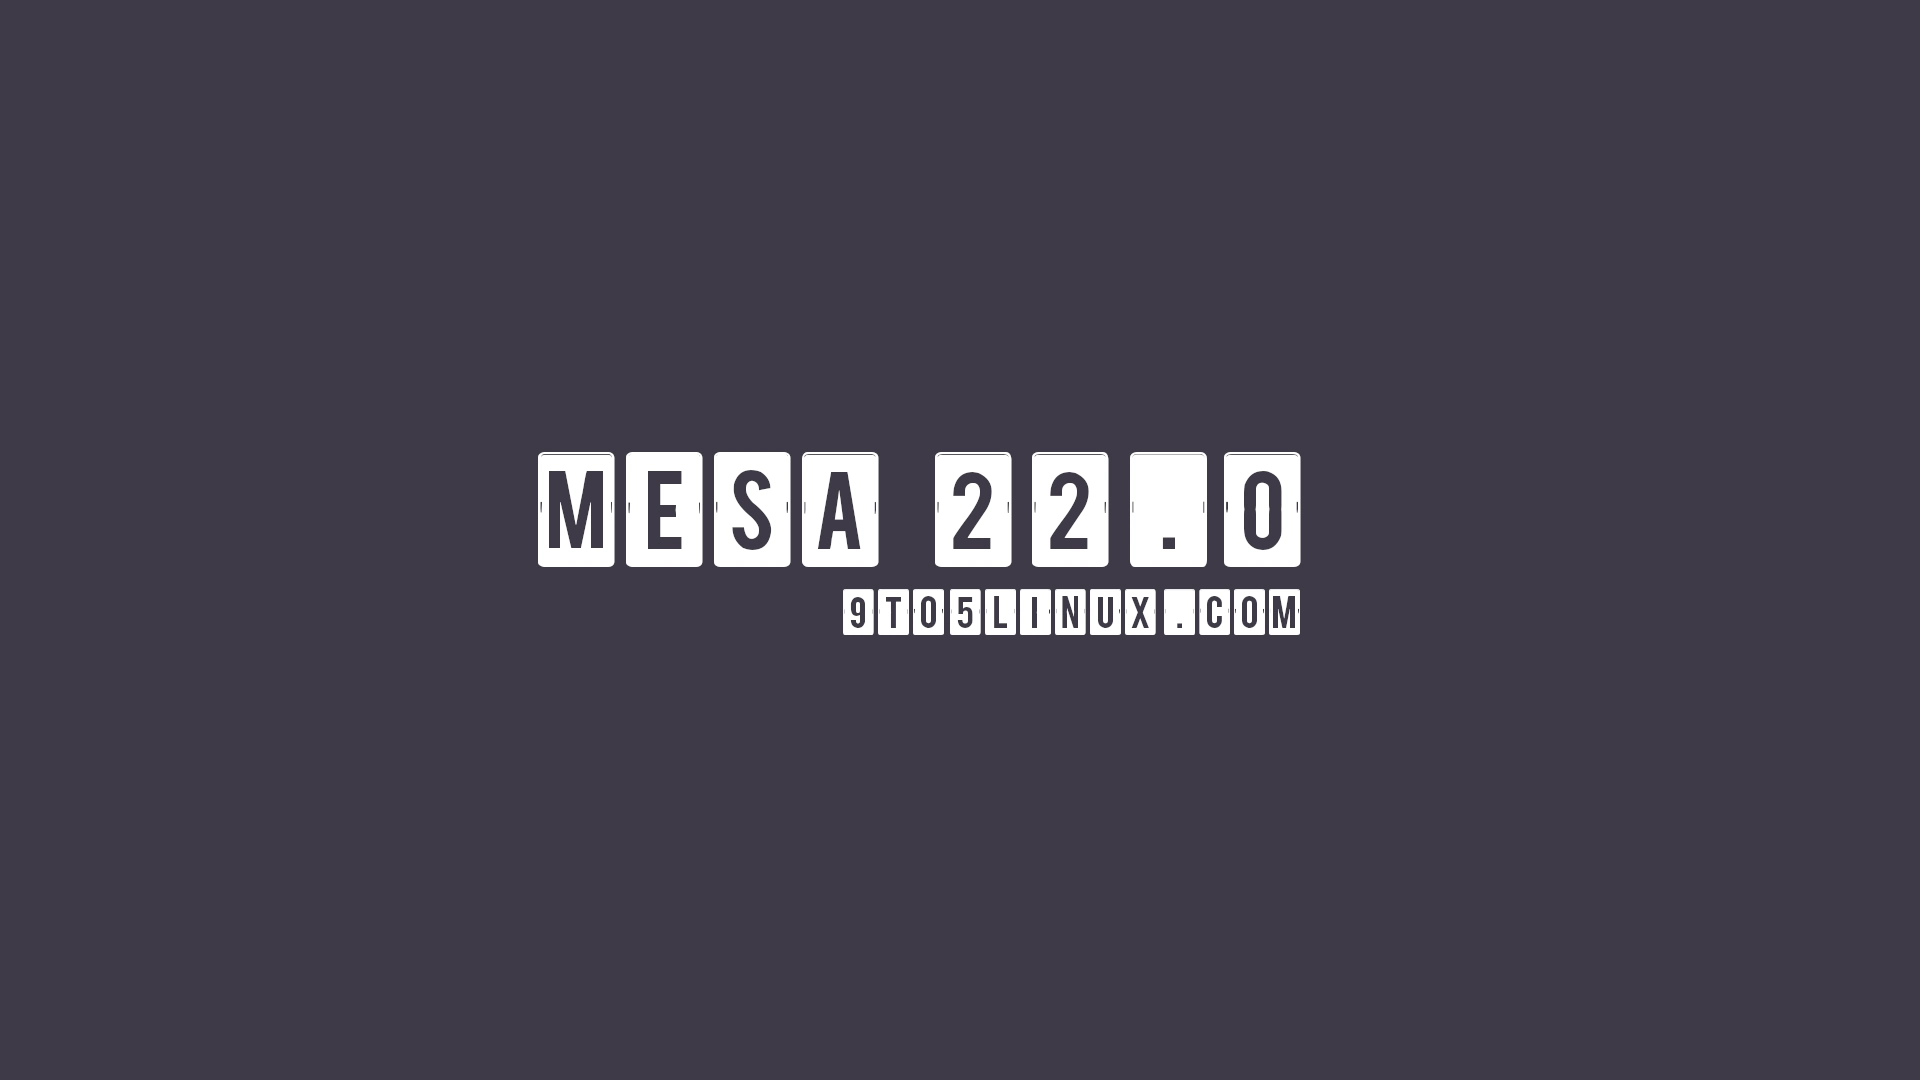 Mesa 22.0 Officially Released, Brings Vulkan 1.3 and Improves Support for Many Games